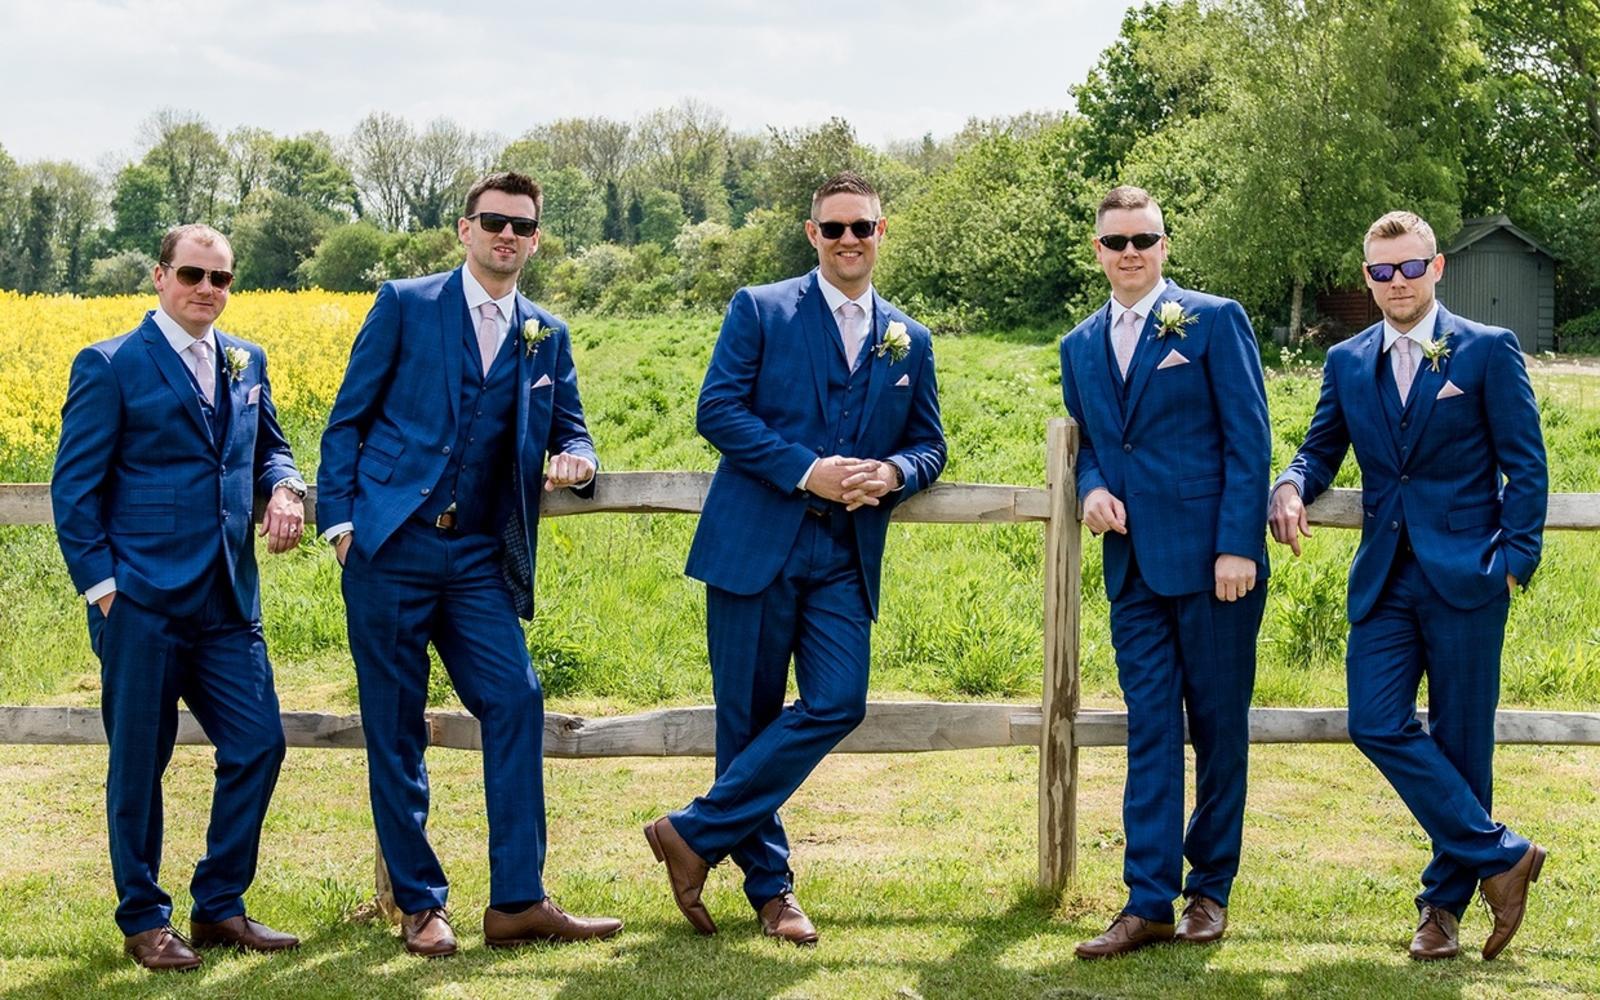 Capture Every Moment wedding photography duo from Cirencester reportage and traditional photographers Lapstone Barn Chipping Campden Cotswolds venue groomsmen navy tailored suits